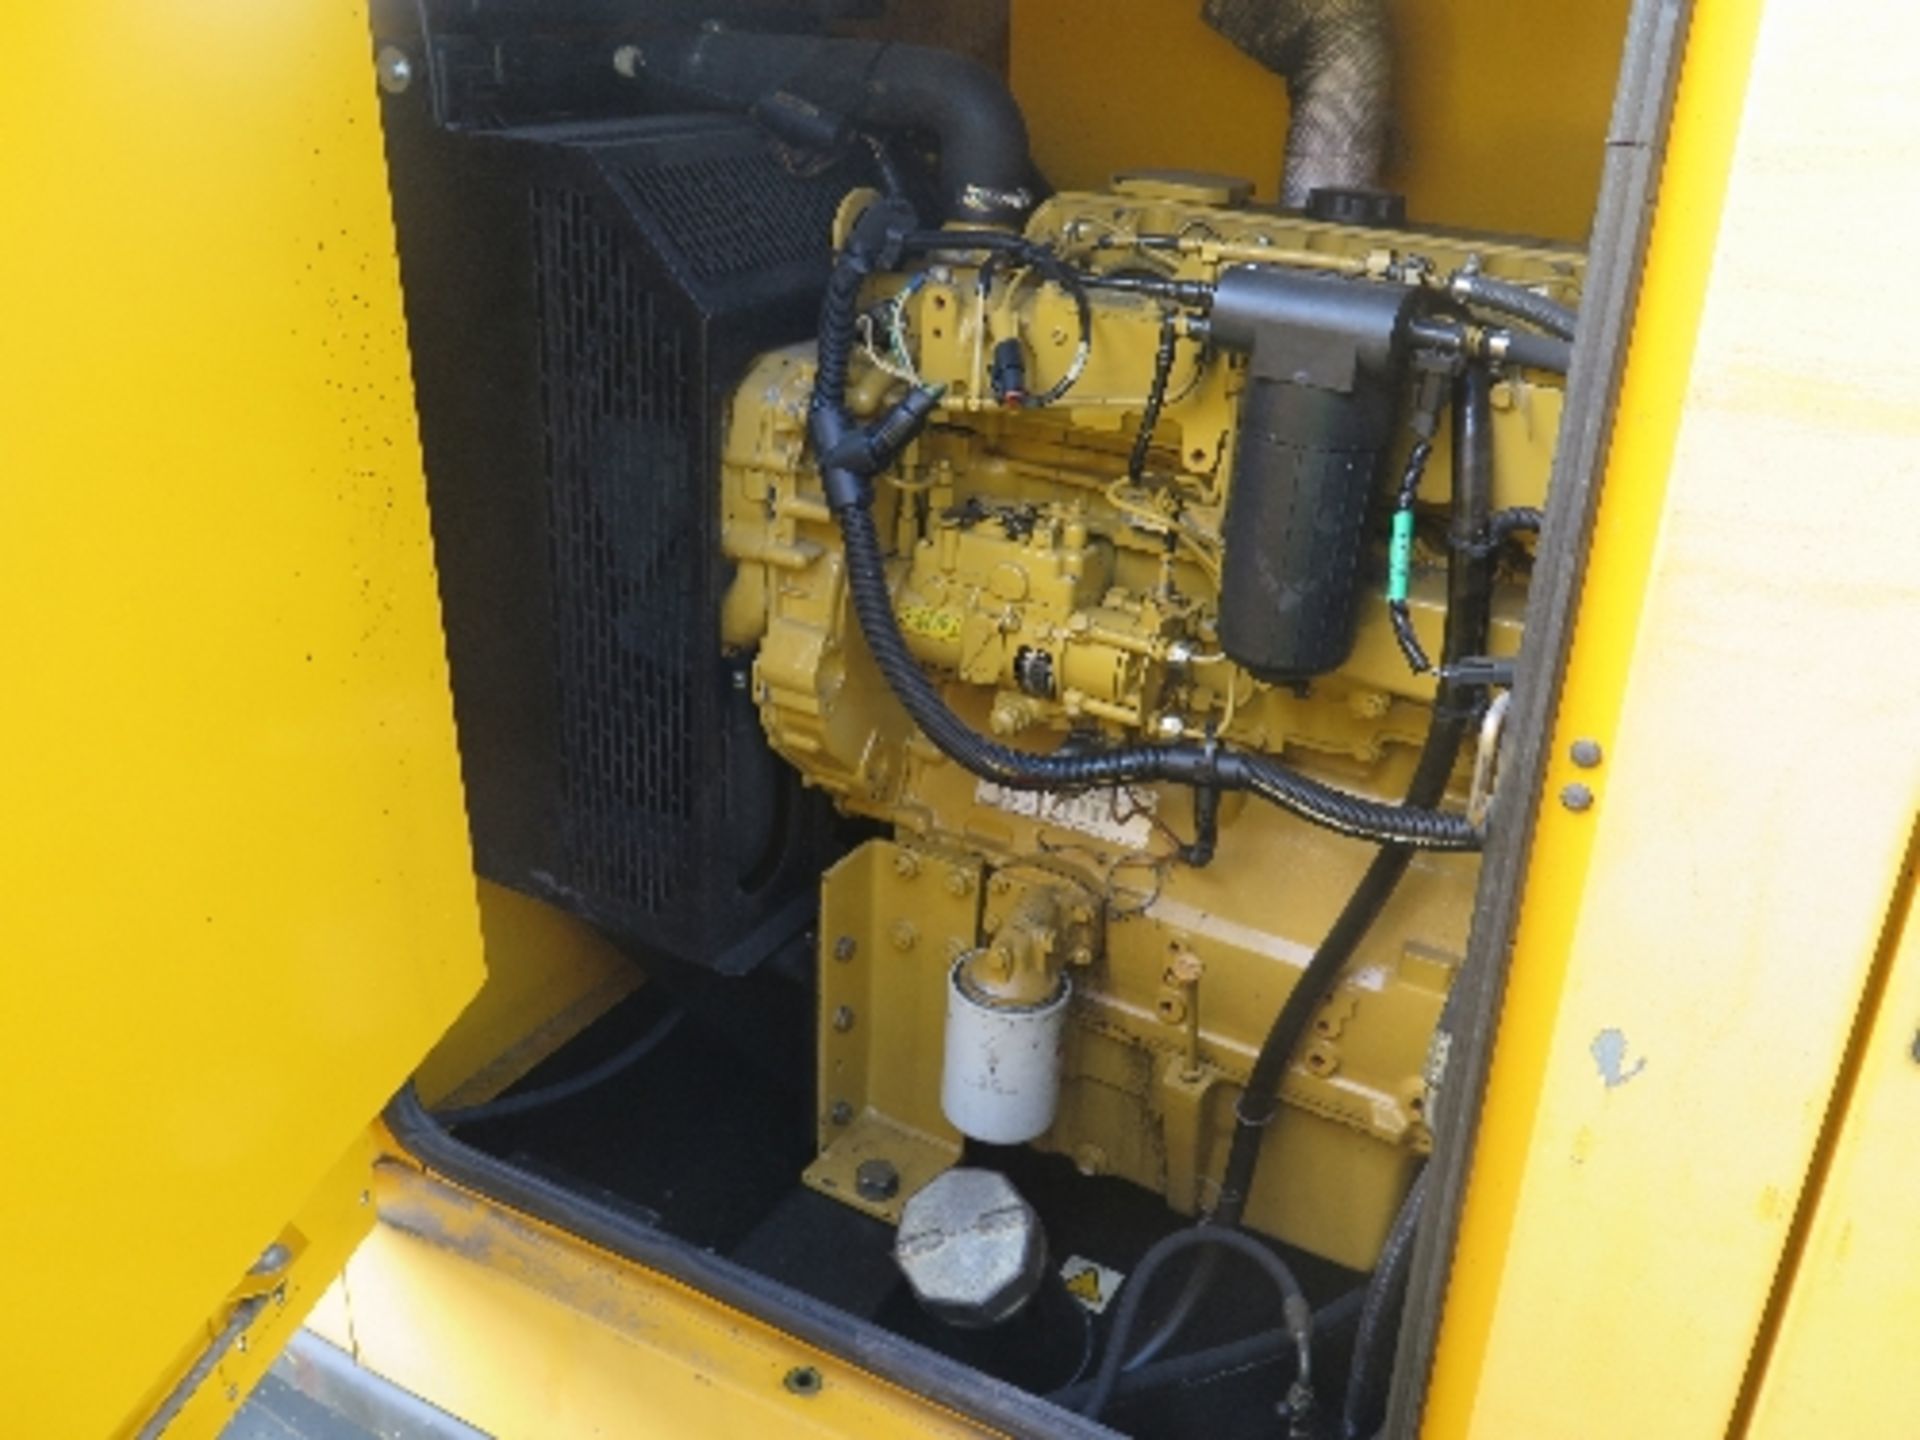 Caterpillar XQE80 generator 10433 hrs 145934
PERKINS - RUNS AND MAKES POWER
ALL LOTS are SOLD AS - Image 3 of 6